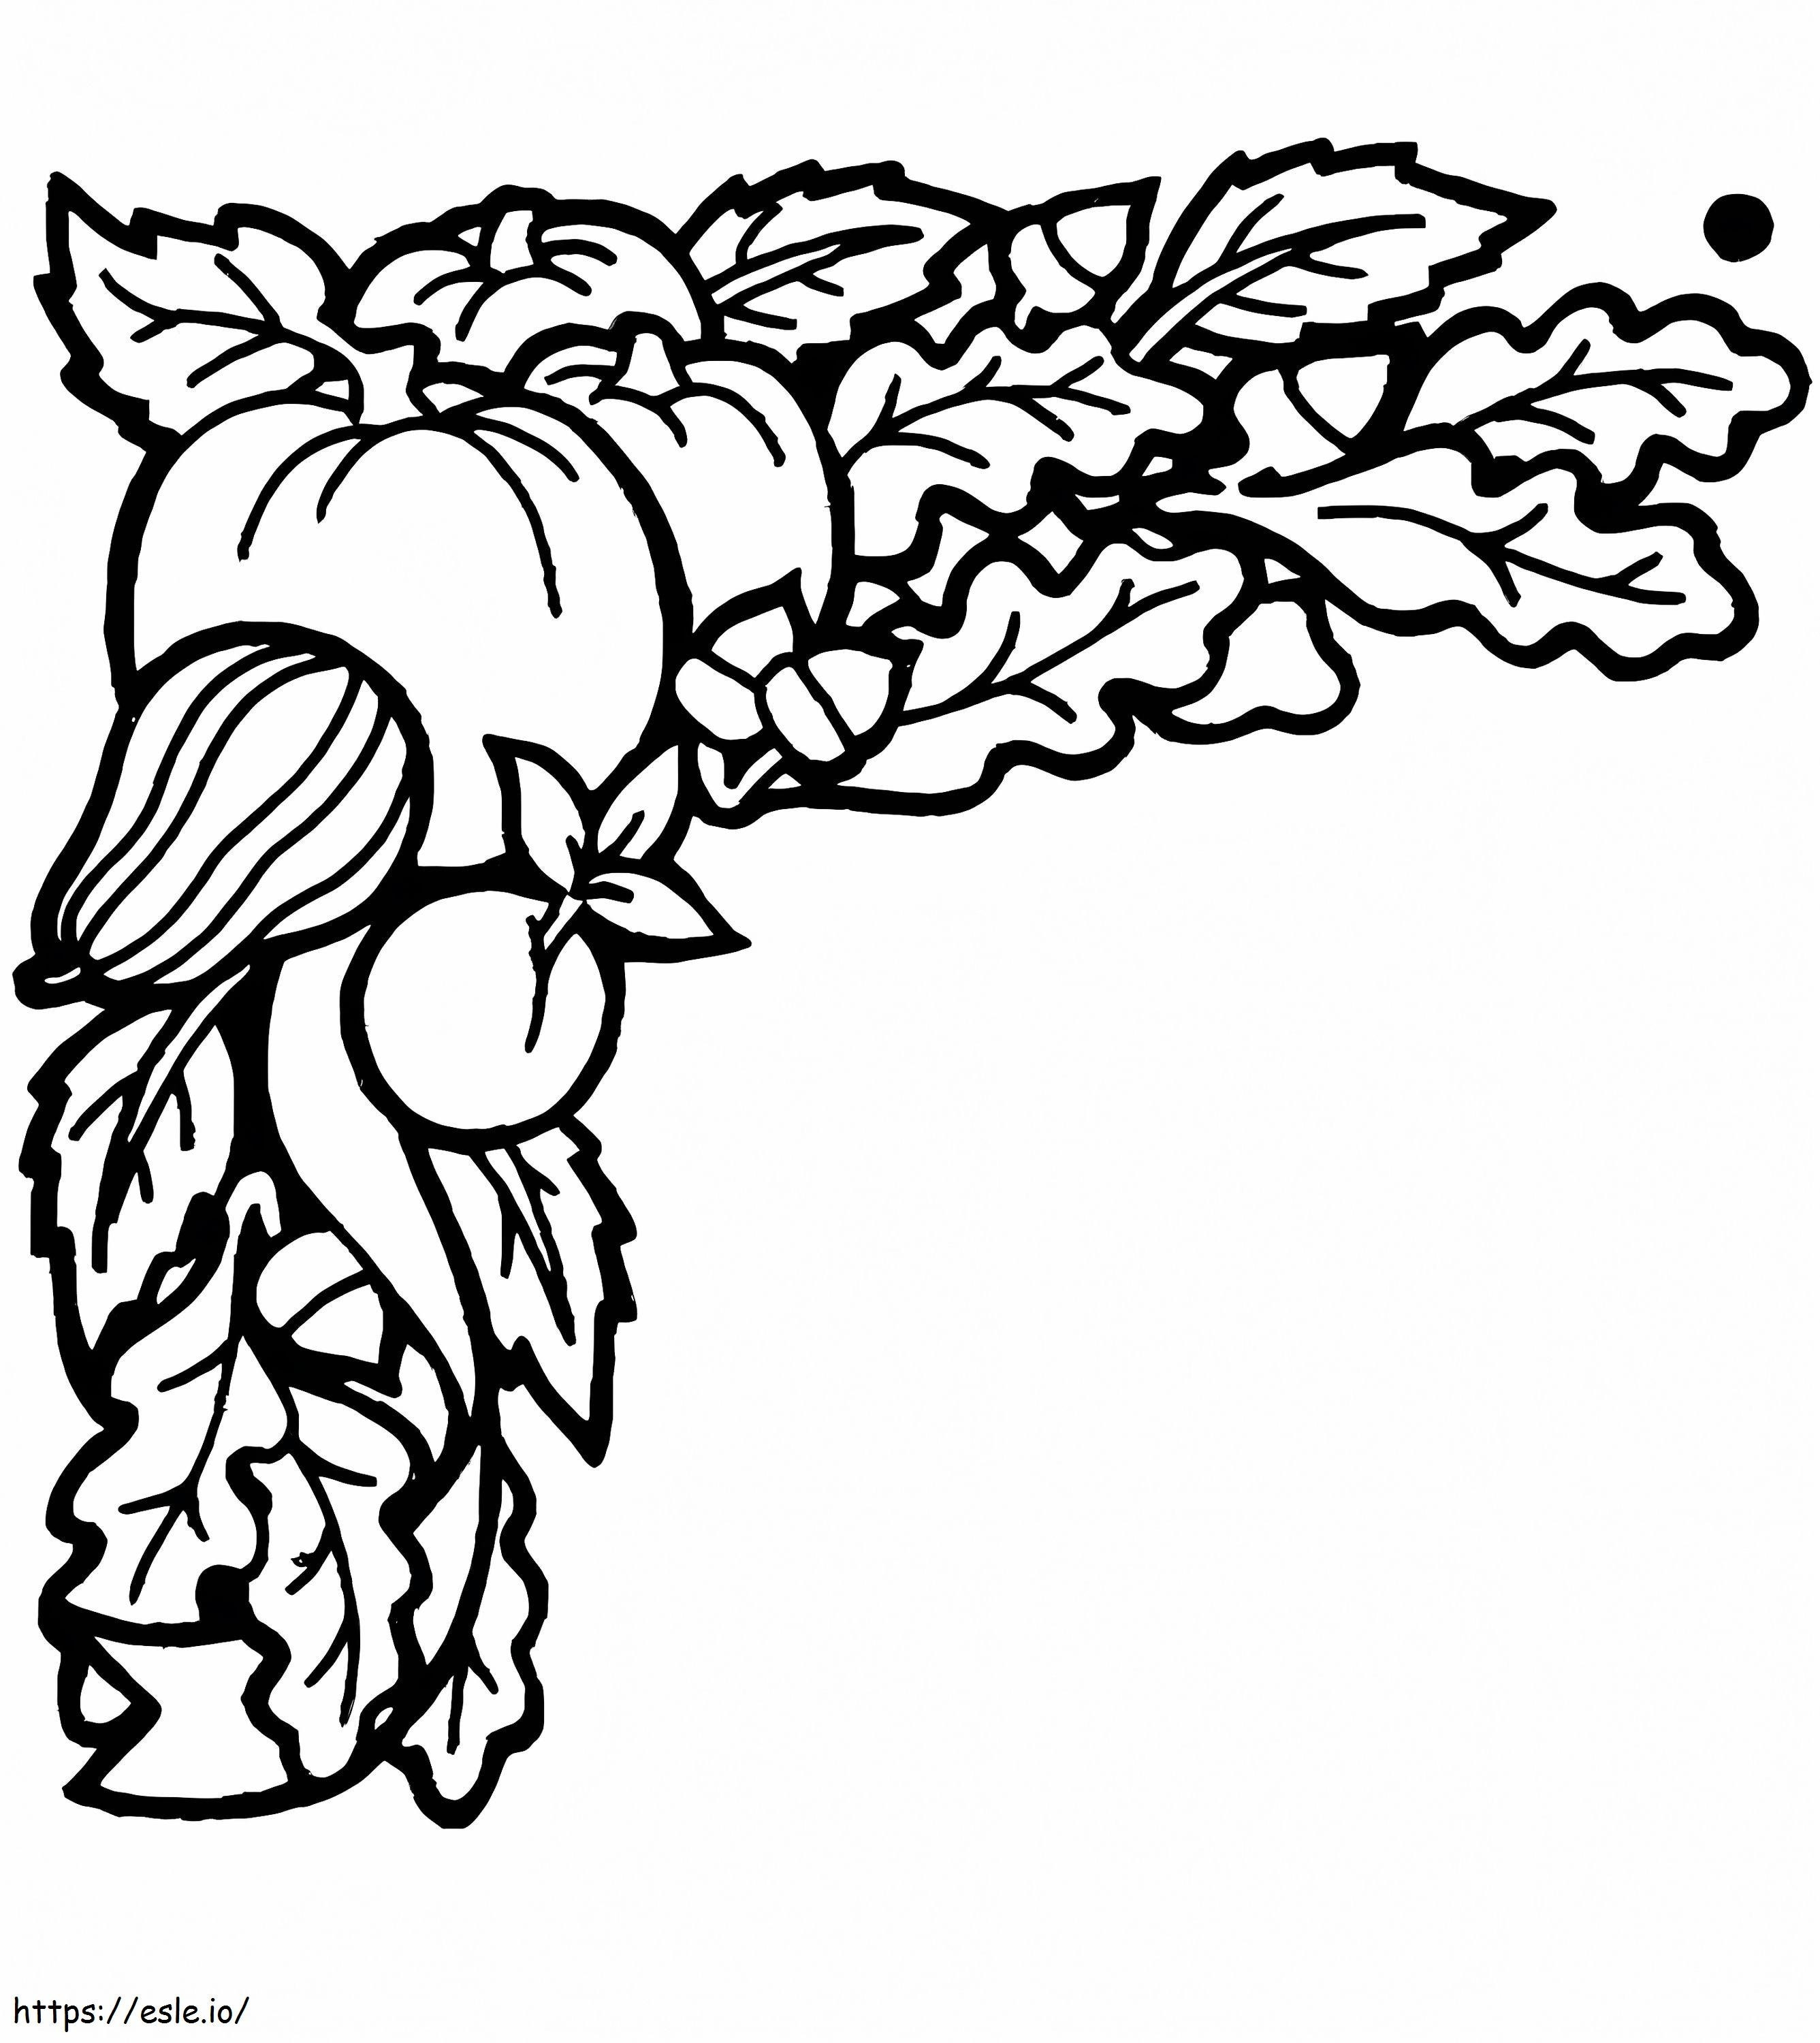 Harvest 6 coloring page